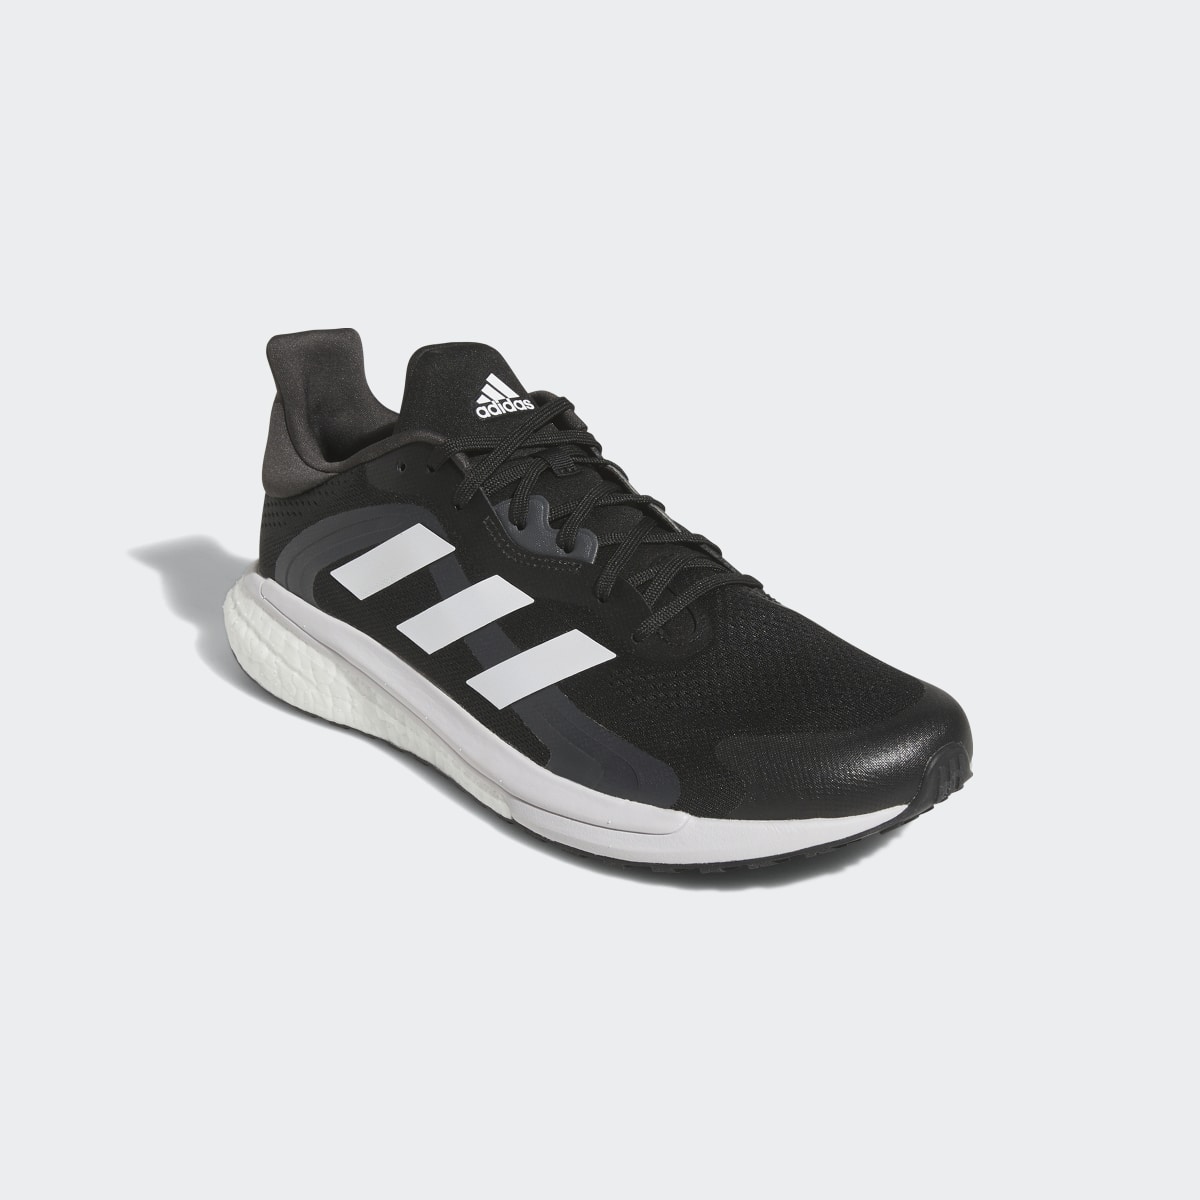 Adidas SolarGlide 4 ST Shoes. 9